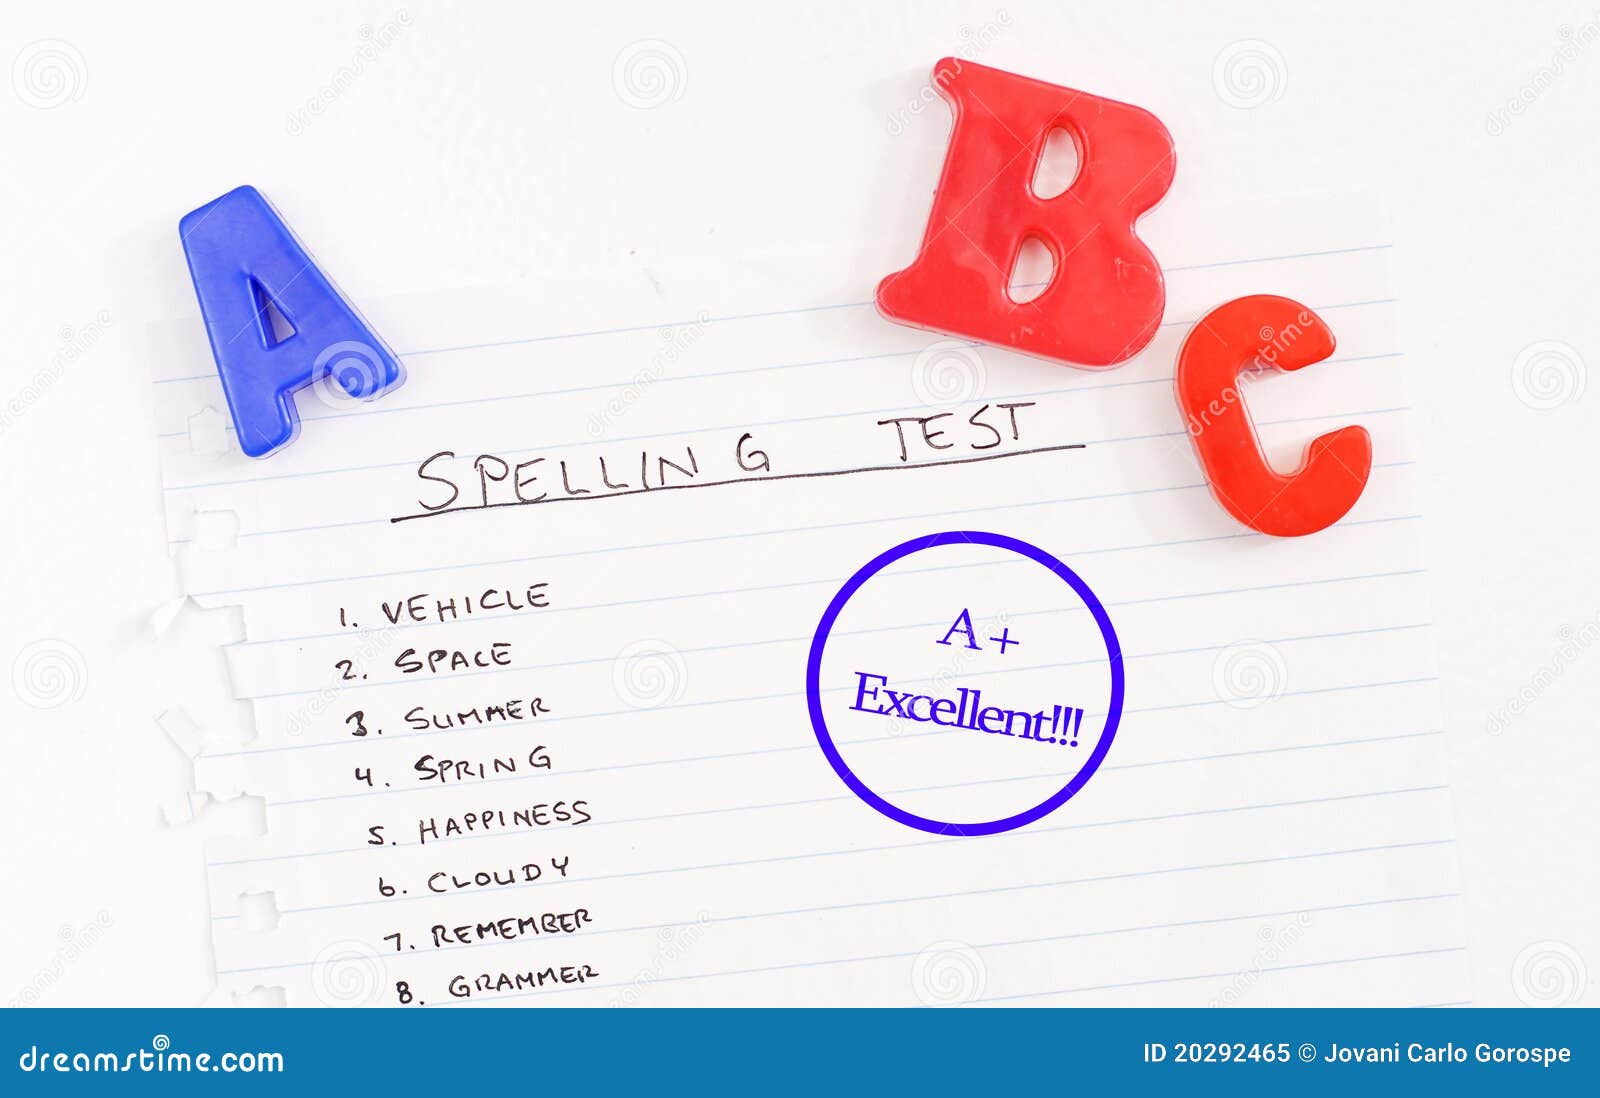 spelling test results